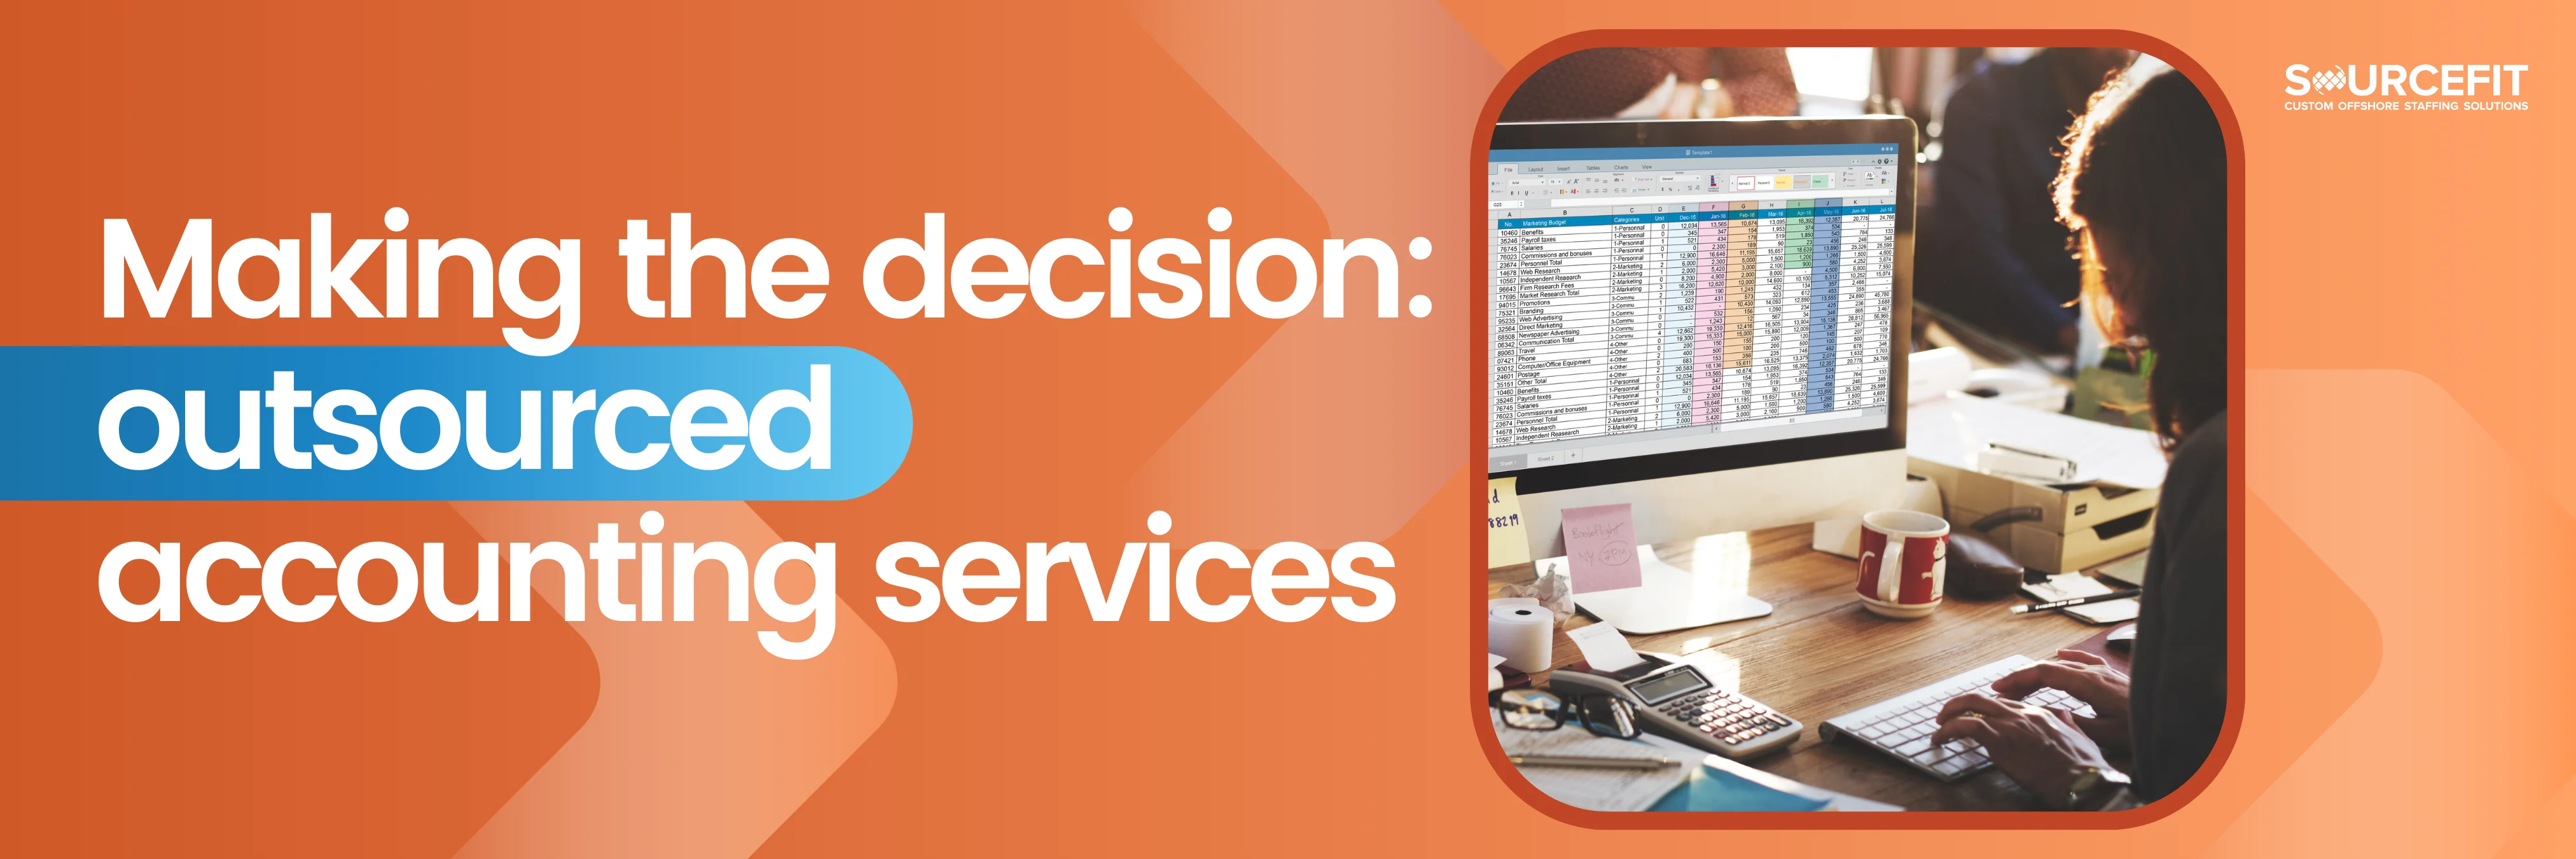 Making-the-decision_-outsourced-accounting-services_1200x628